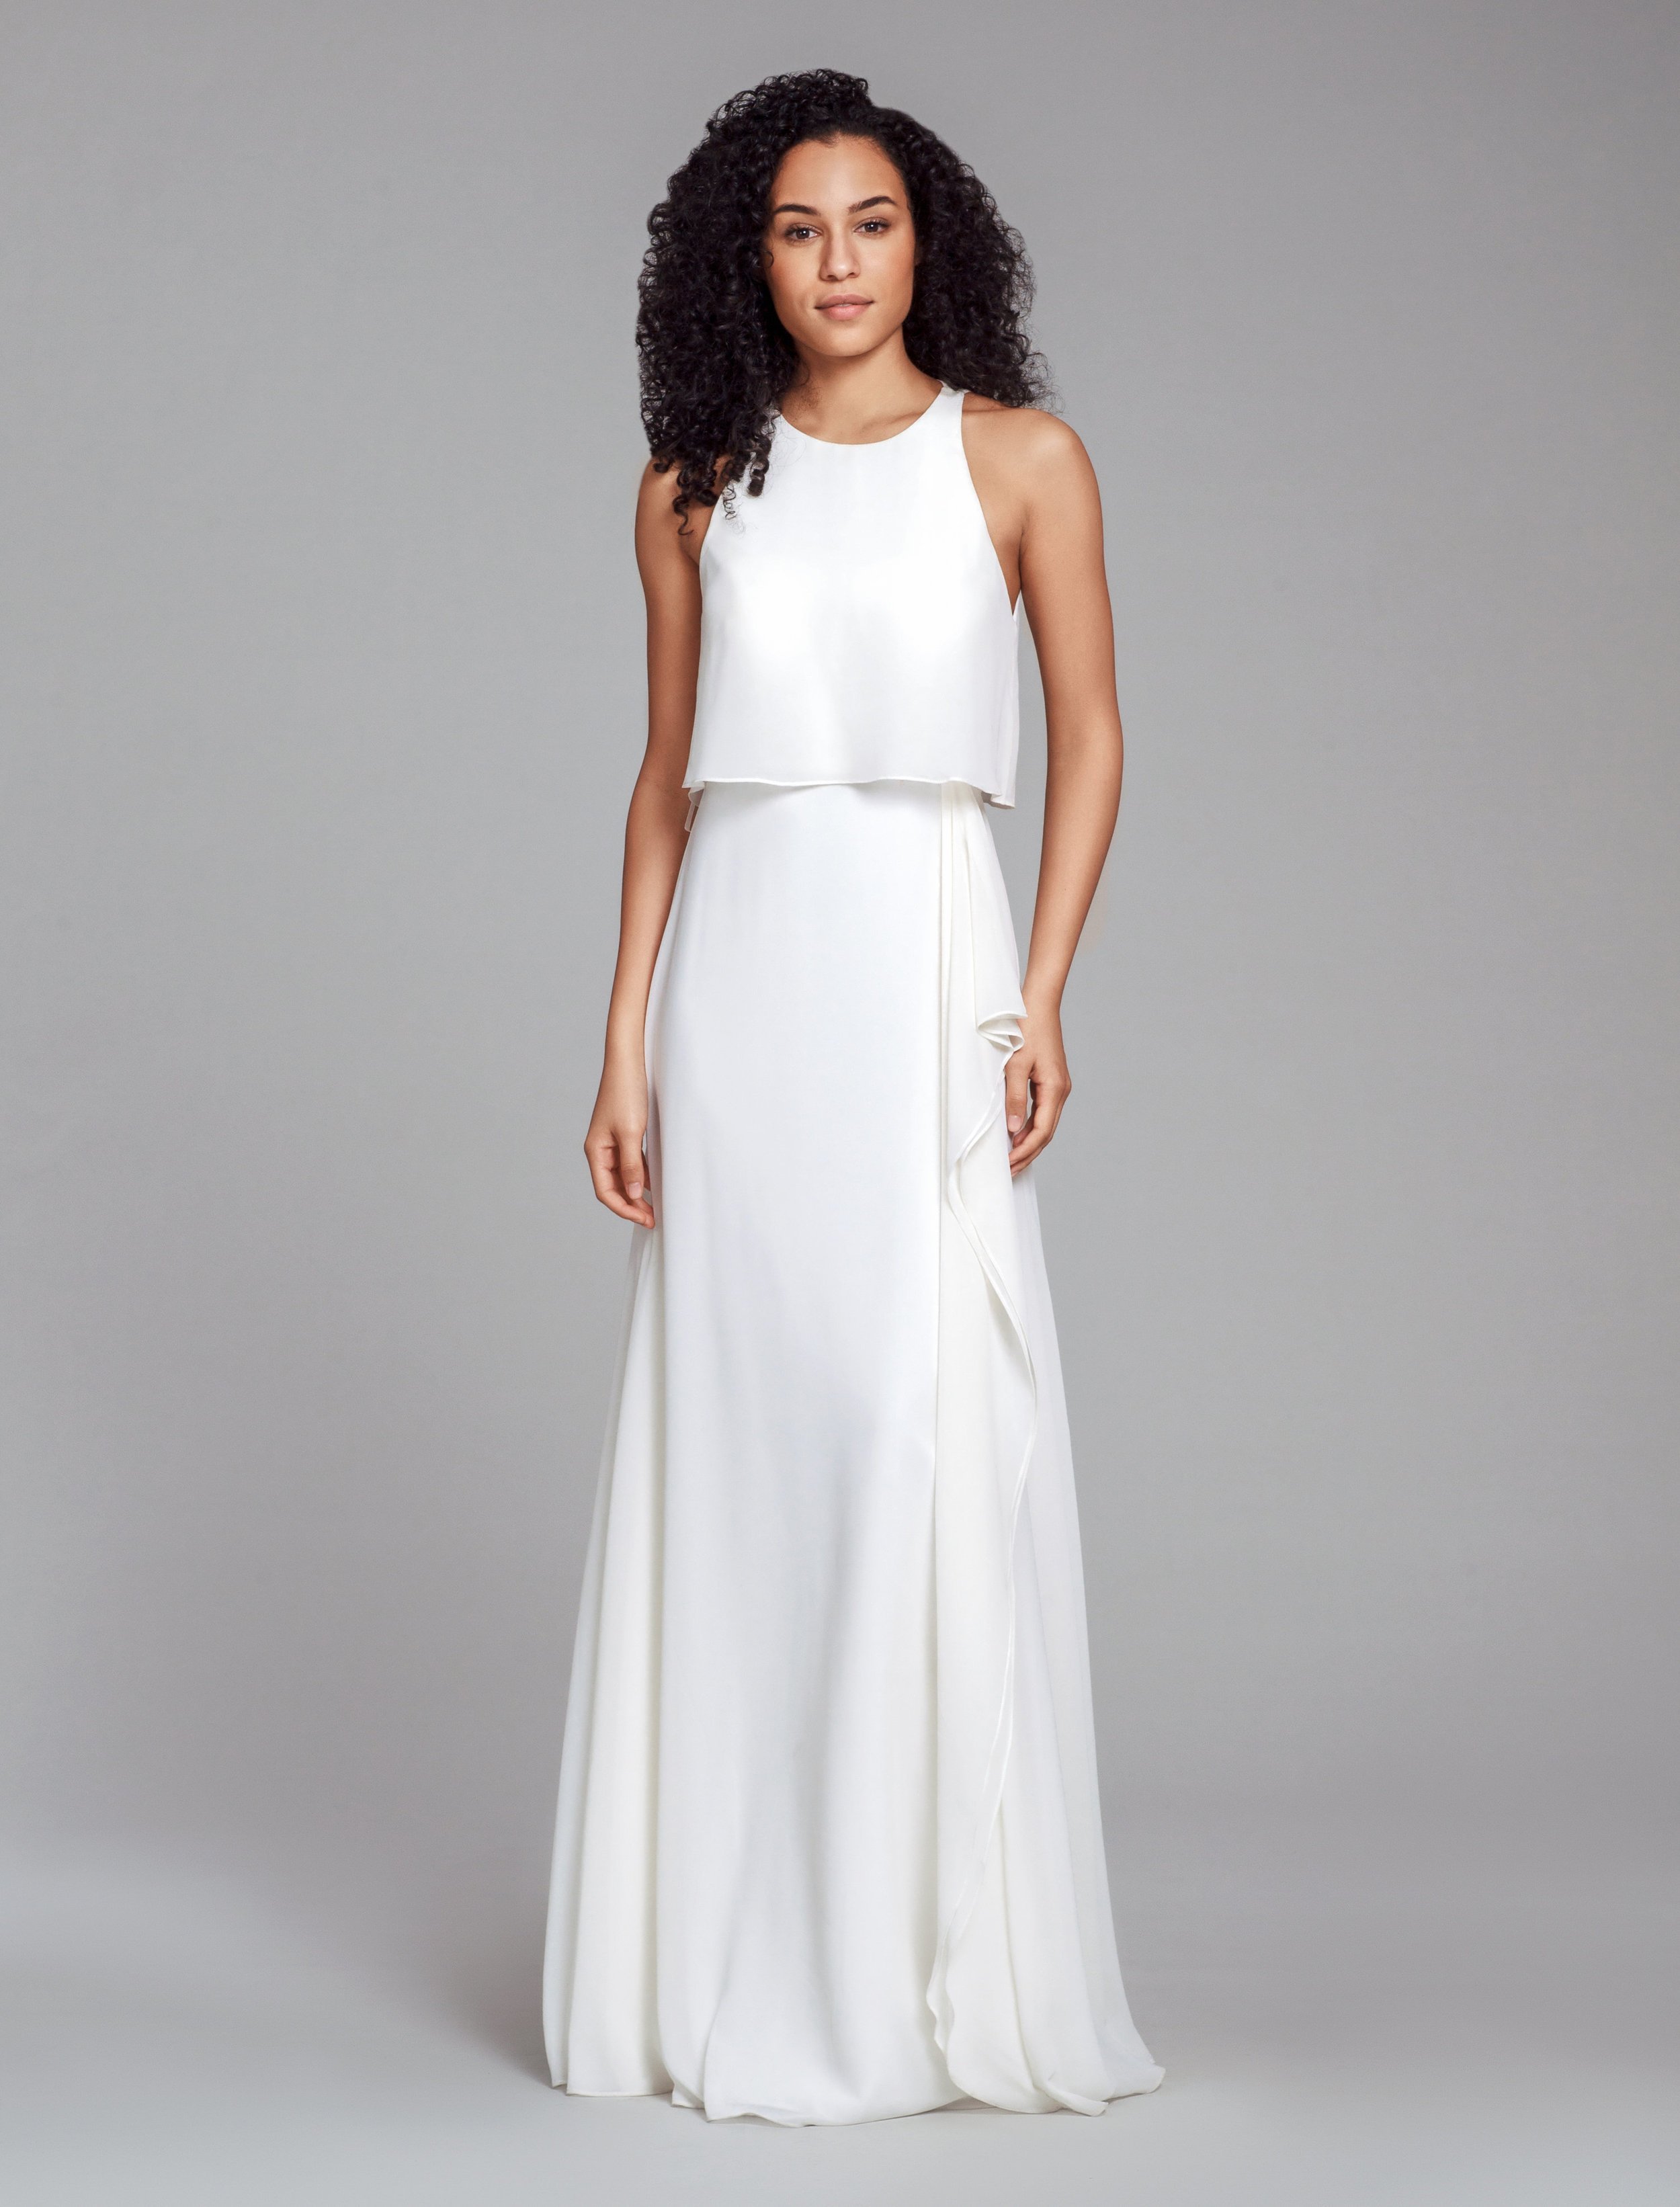 hayley-paige-occasions-bridesmaids-fall-2018-style-5850.jpg